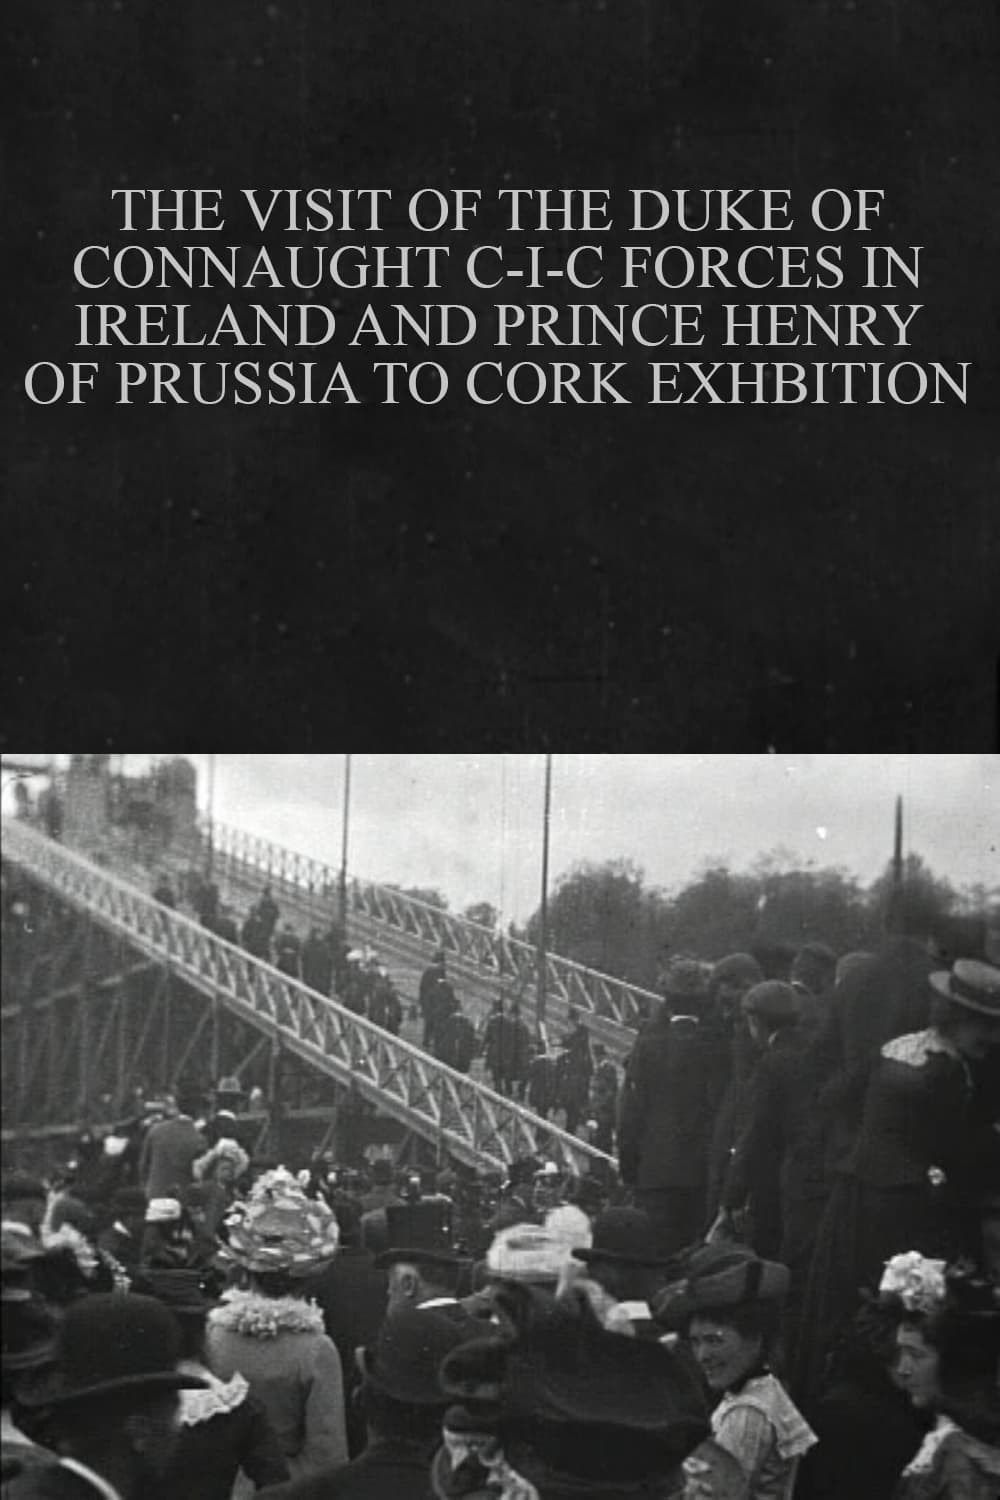 The Visit of the Duke of Connaught C-I-C Forces in Ireland and Prince Henry of Prussia to Cork Exhibition